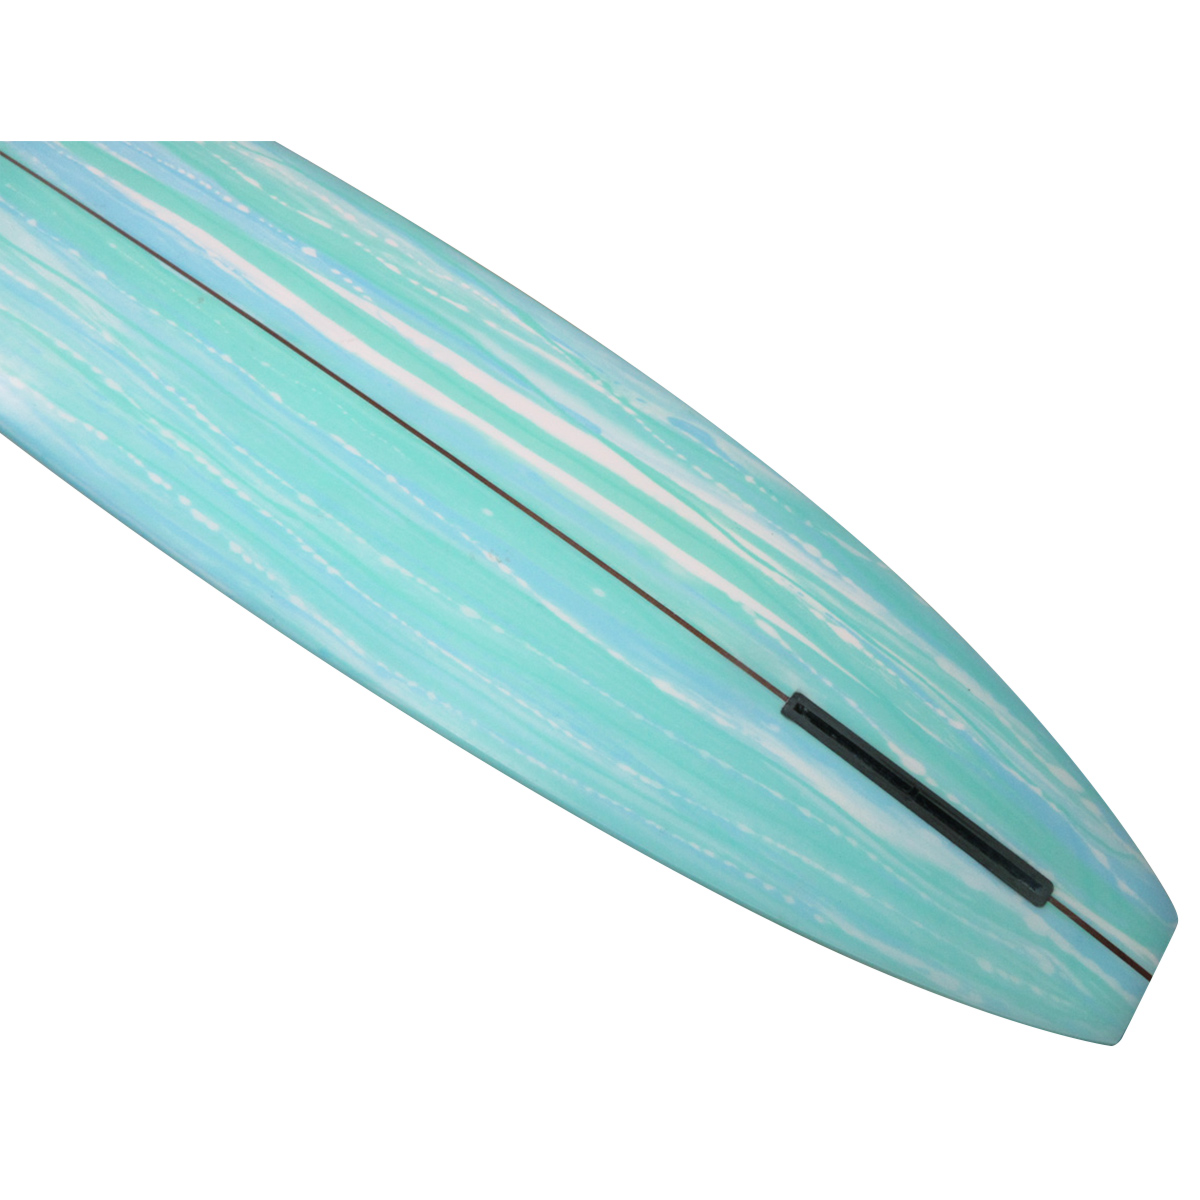 LARRY MABILE SURFBOARDS / Noserider 10`0